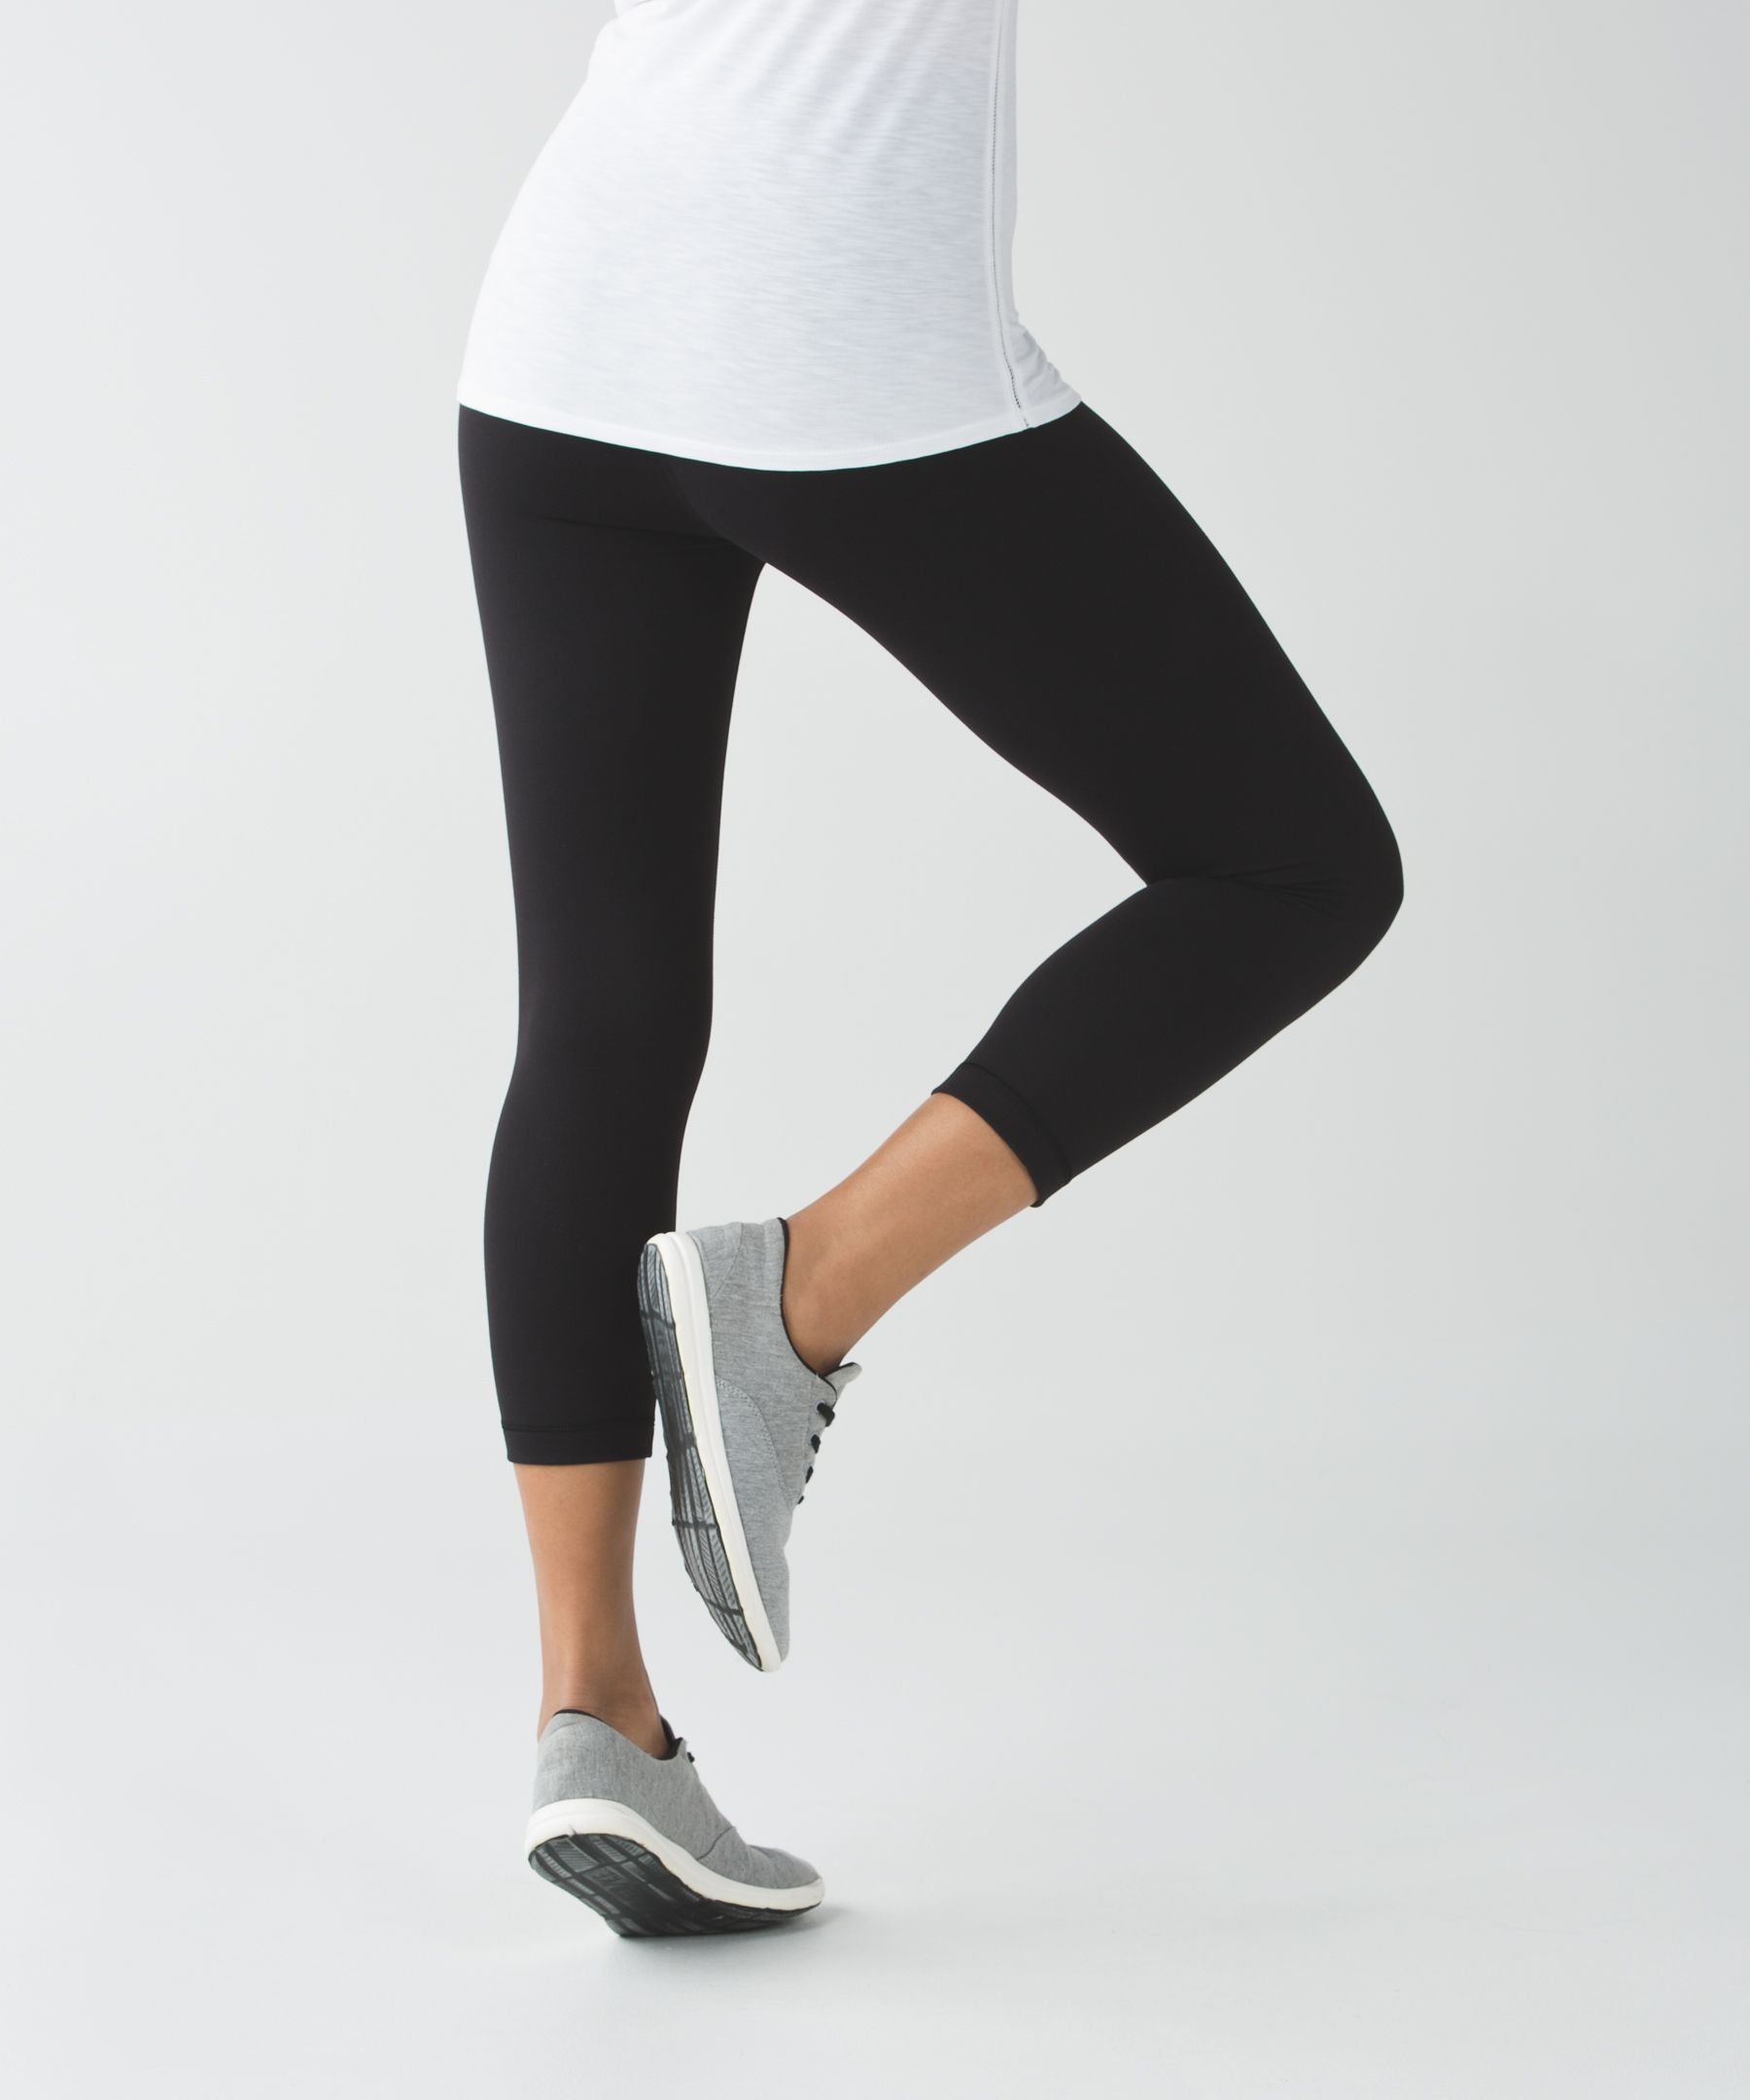 Lululemon - Wunder Under Crop (Hi-Rise) *21 Luon Knit Heathered Black  Leggings Size 10 - $47 (46% Off Retail) - From Abbey